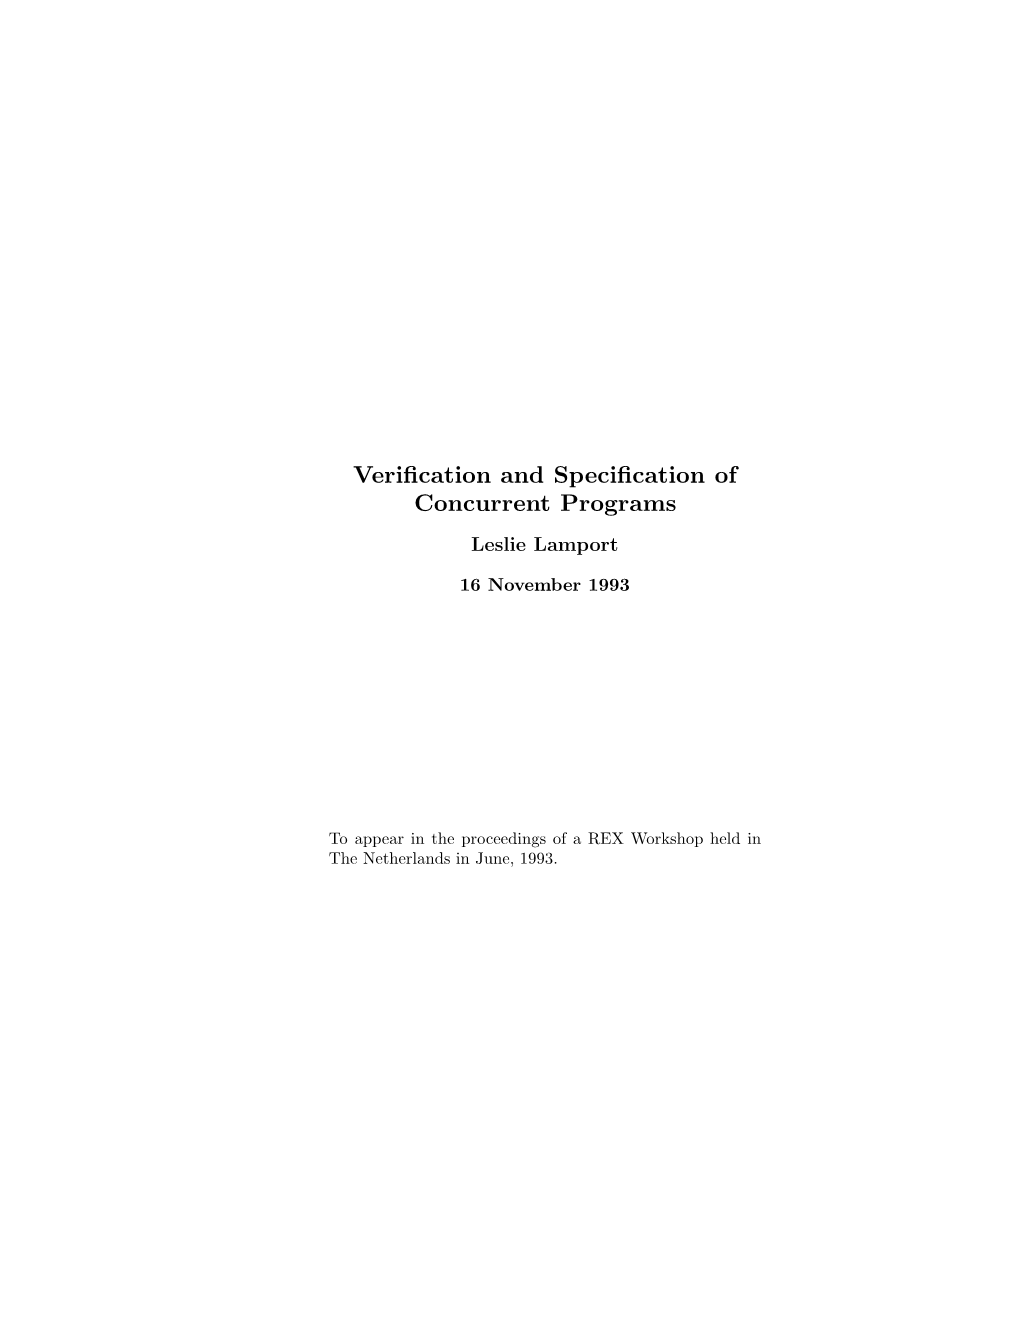 Verification and Specification of Concurrent Programs